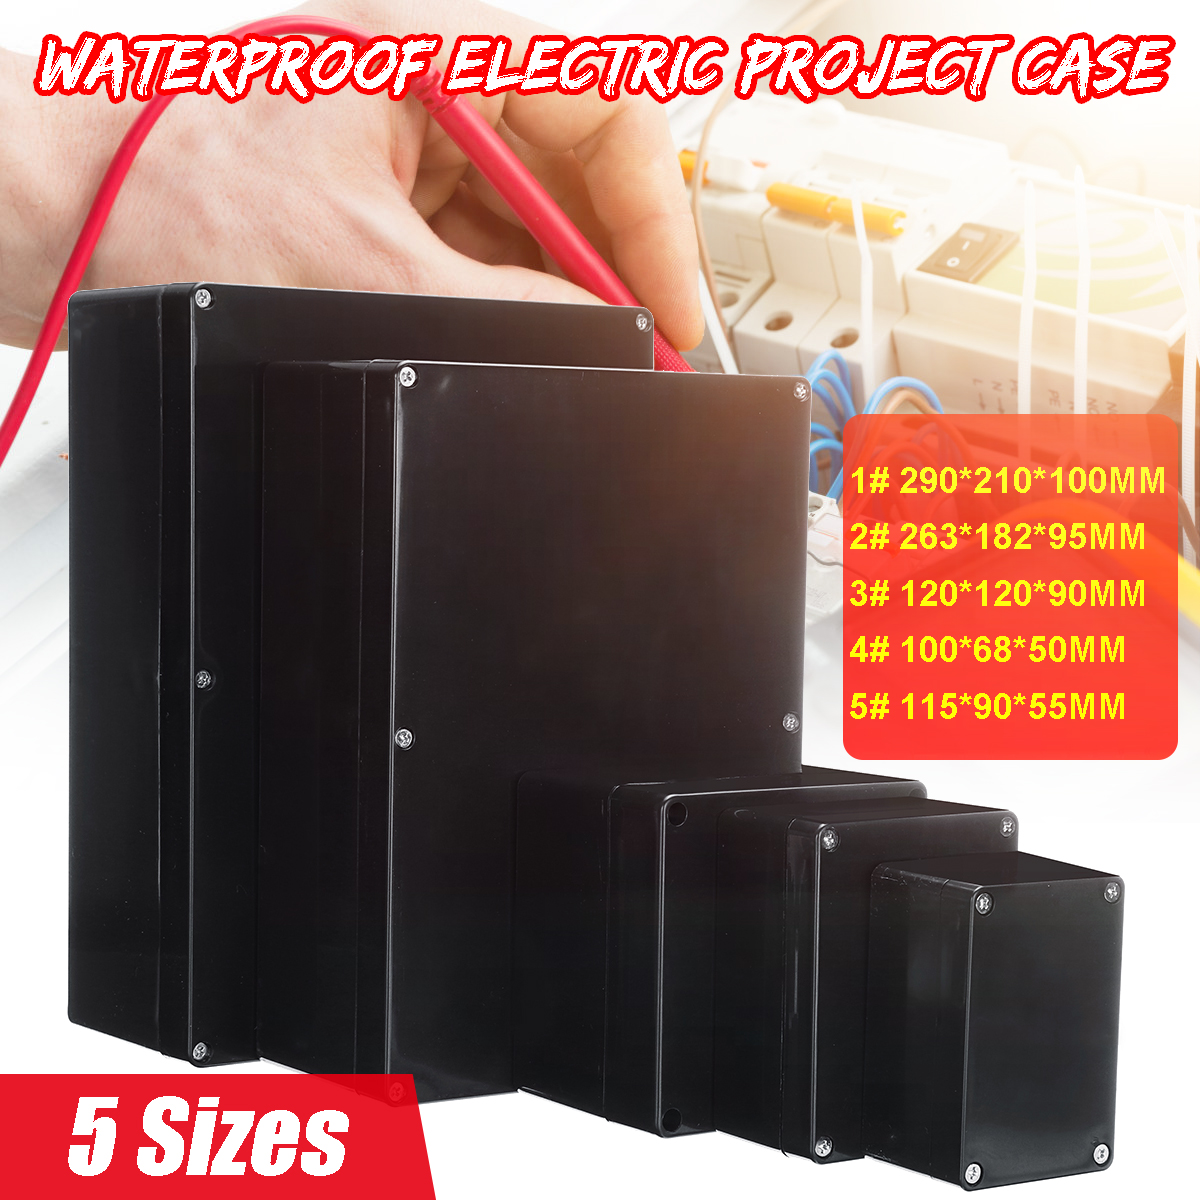 Enclosure-Box-Electronic-Waterproof-Plastic-Electrical-Project-Junction-Case-1692472-1